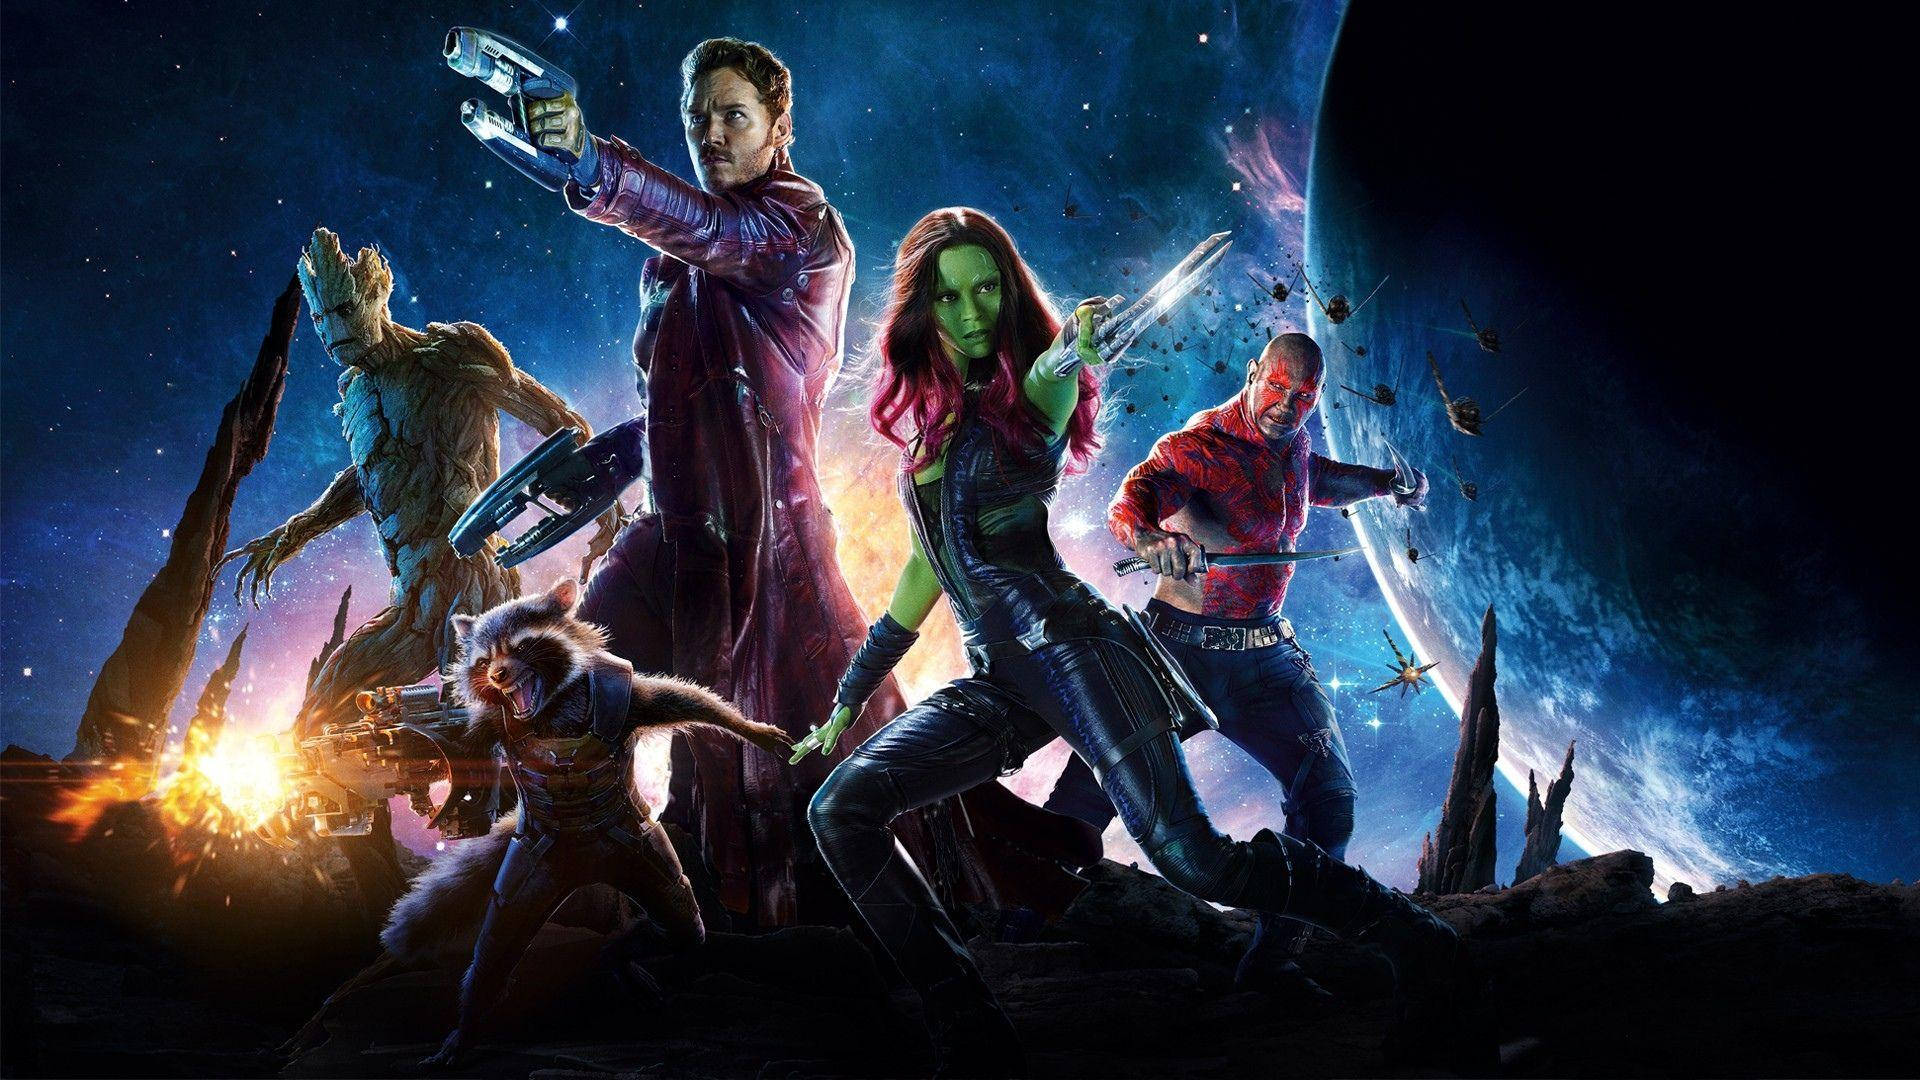 Top 999+ Guardians Of The Galaxy Wallpaper Full HD, 4K✅Free to Use